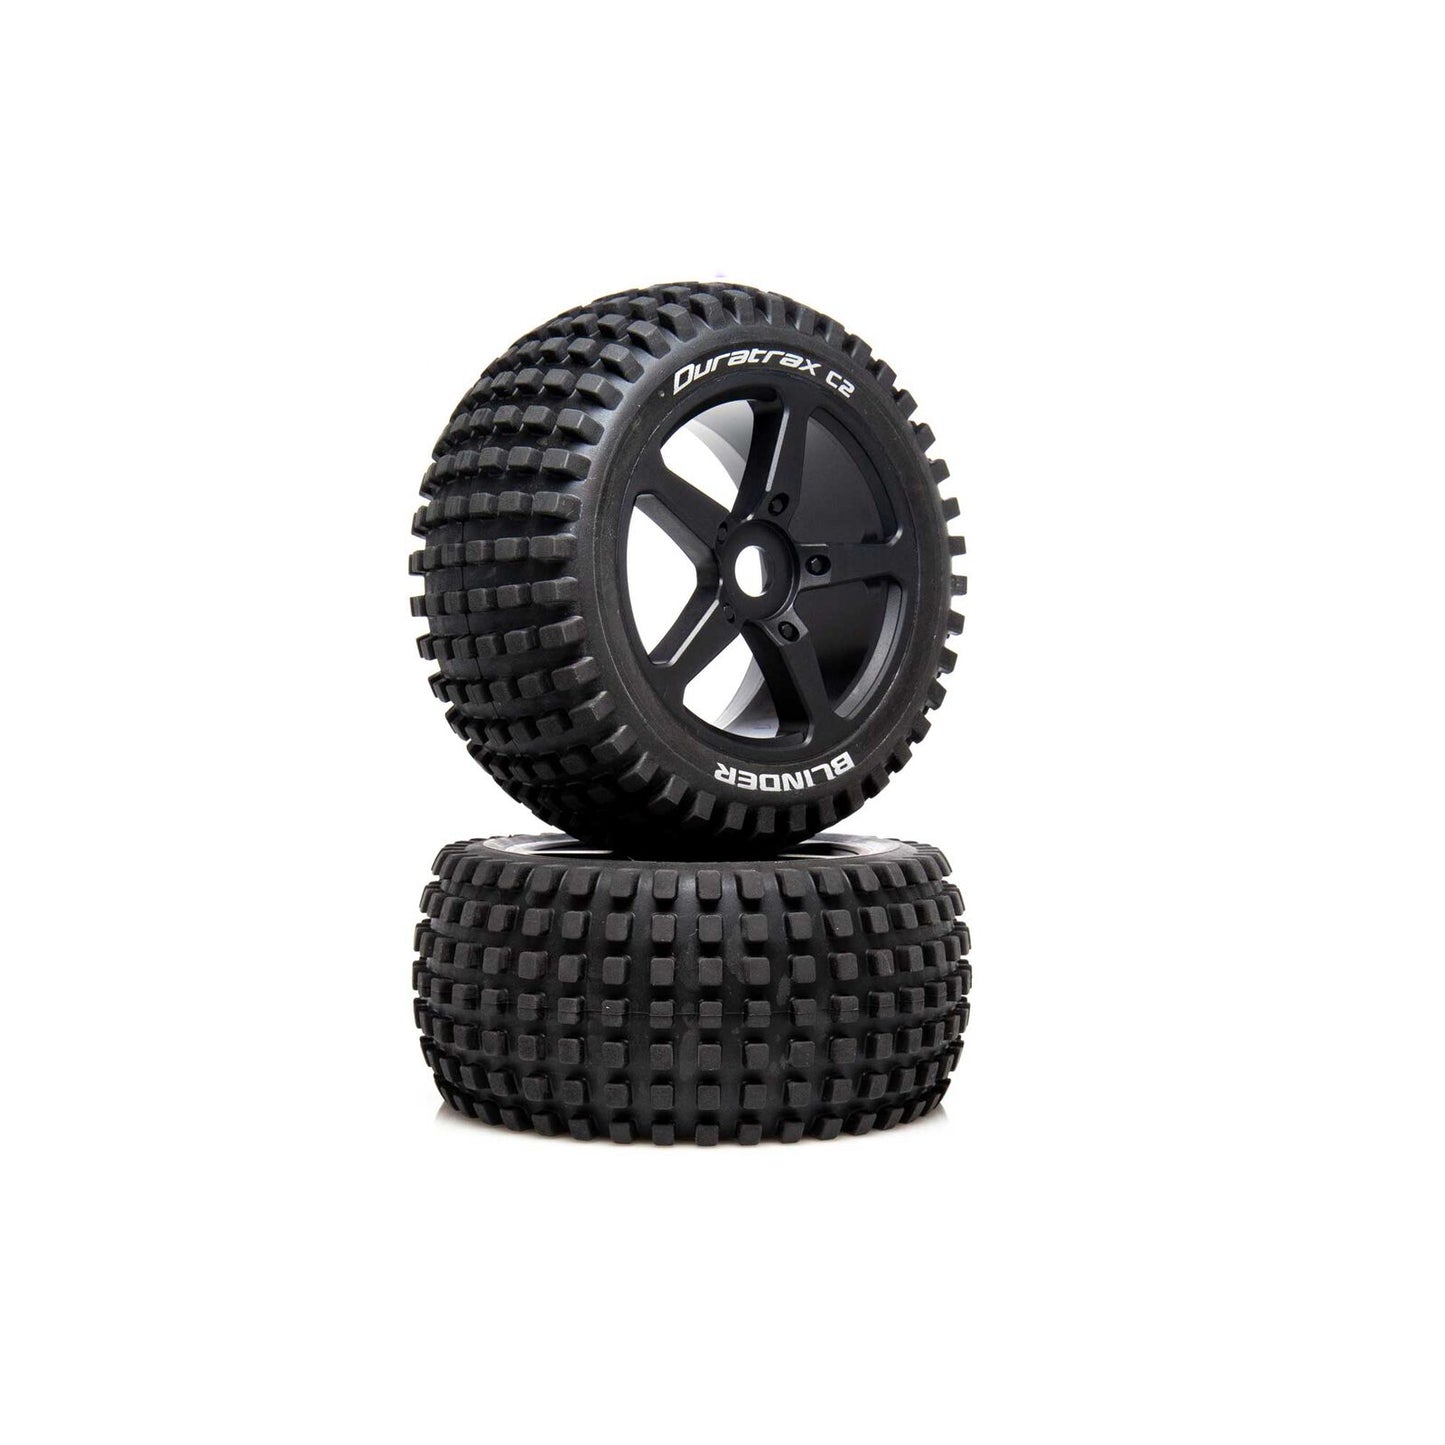 Duratrax DTXC5571 1/8 BLINDER Truggy Tire C2 Mounted 0 Offset (2)